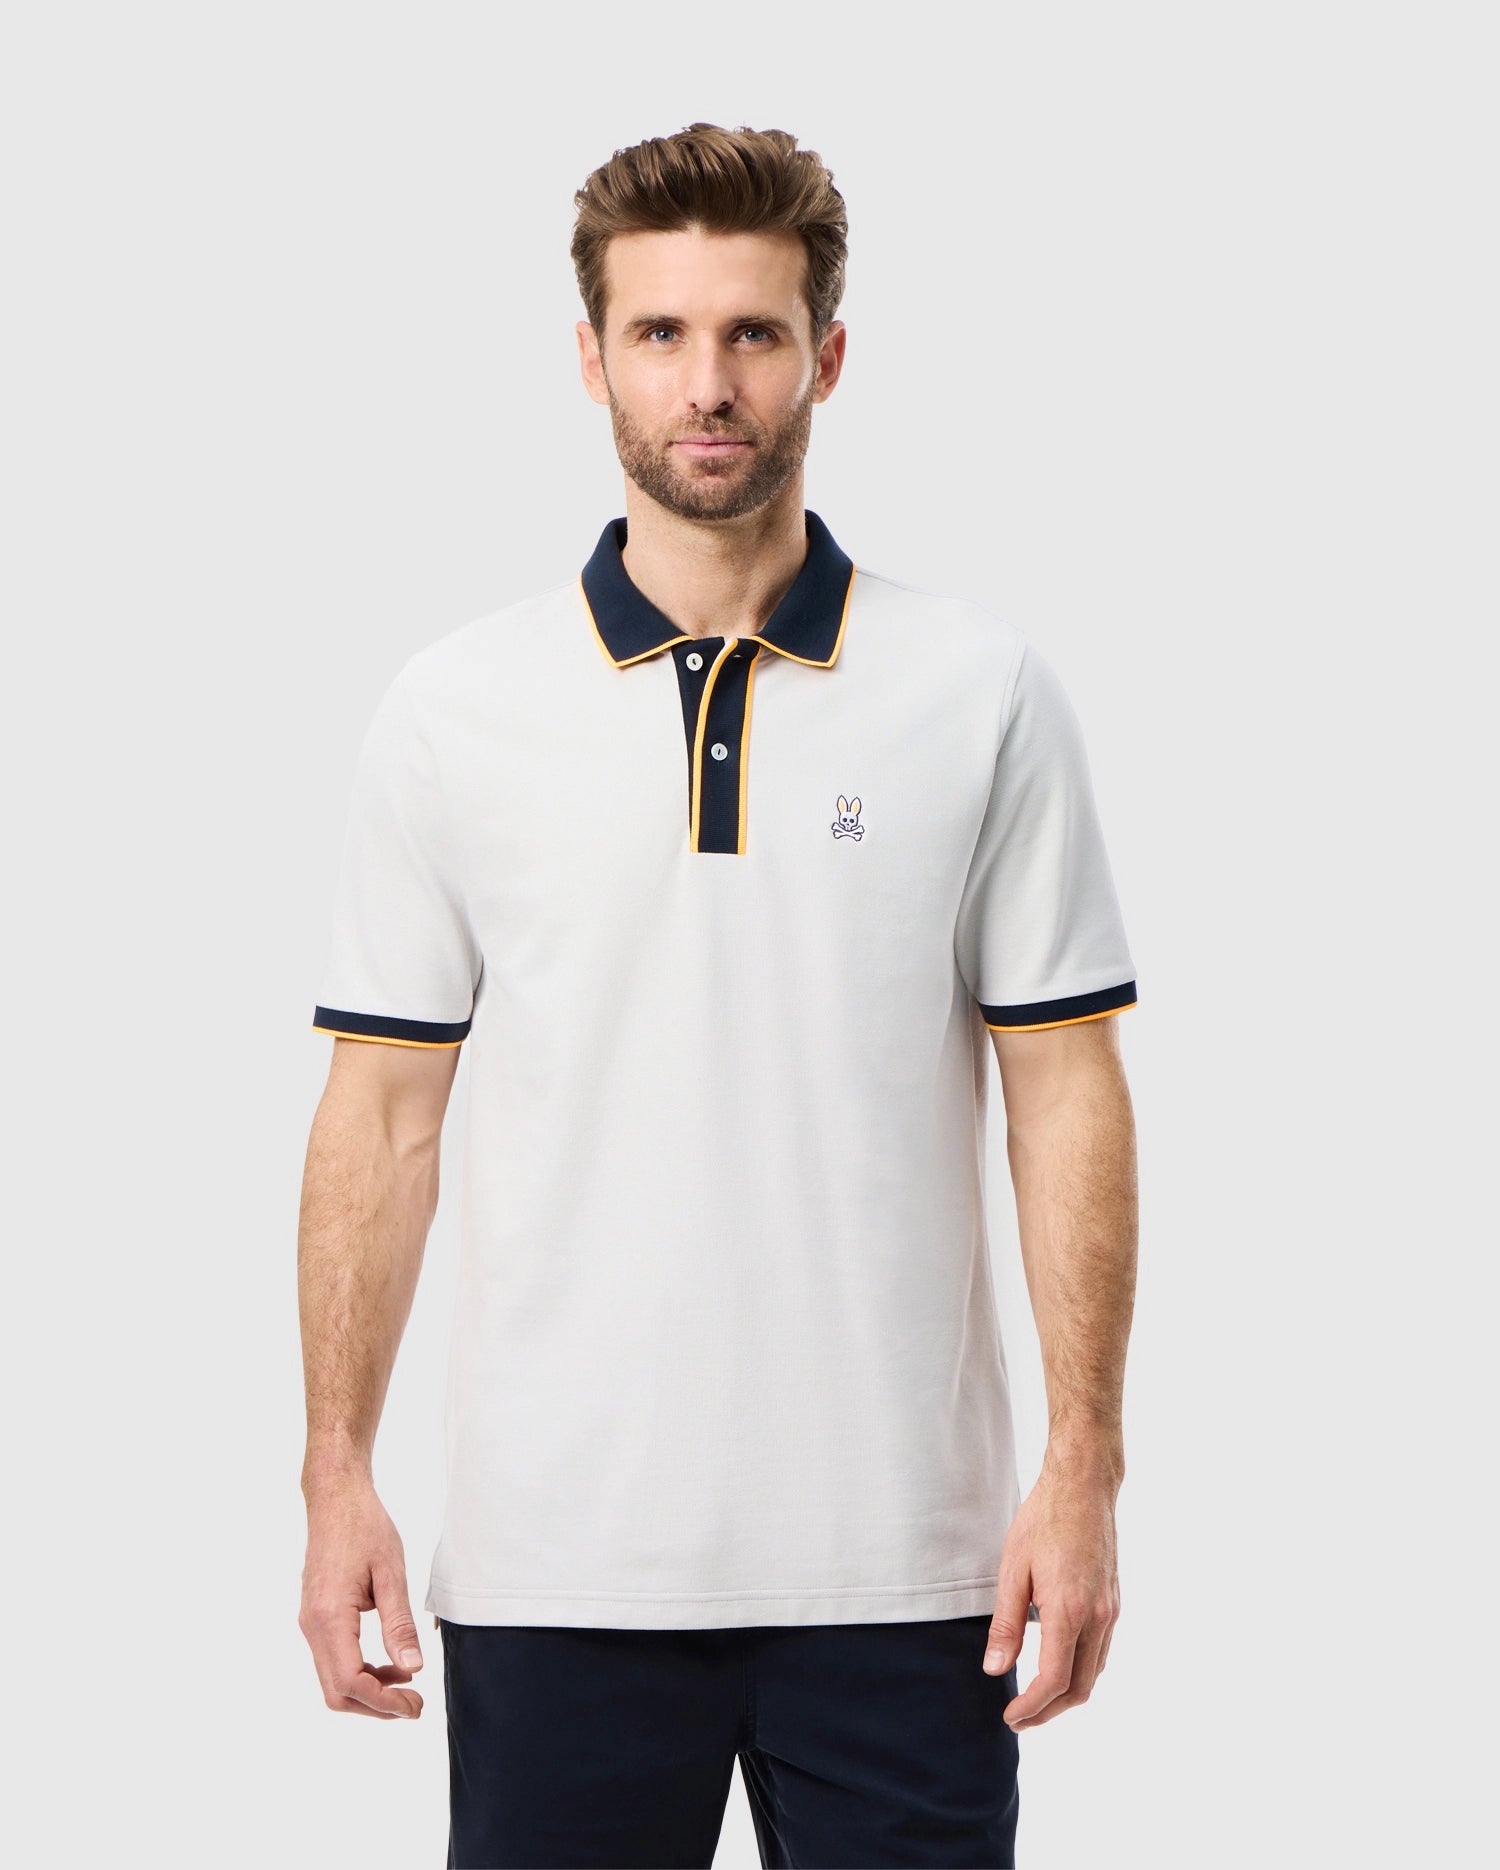 A man with brown hair and a beard is wearing a high quality cotton polo shirt in white, featuring black trim on the collar and sleeves. The MENS DALLAS PIQUE POLO SHIRT - B6K602C200 by Psycho Bunny has an embroidered Bunny logo on the left side of the chest. He is standing against a plain light gray background.